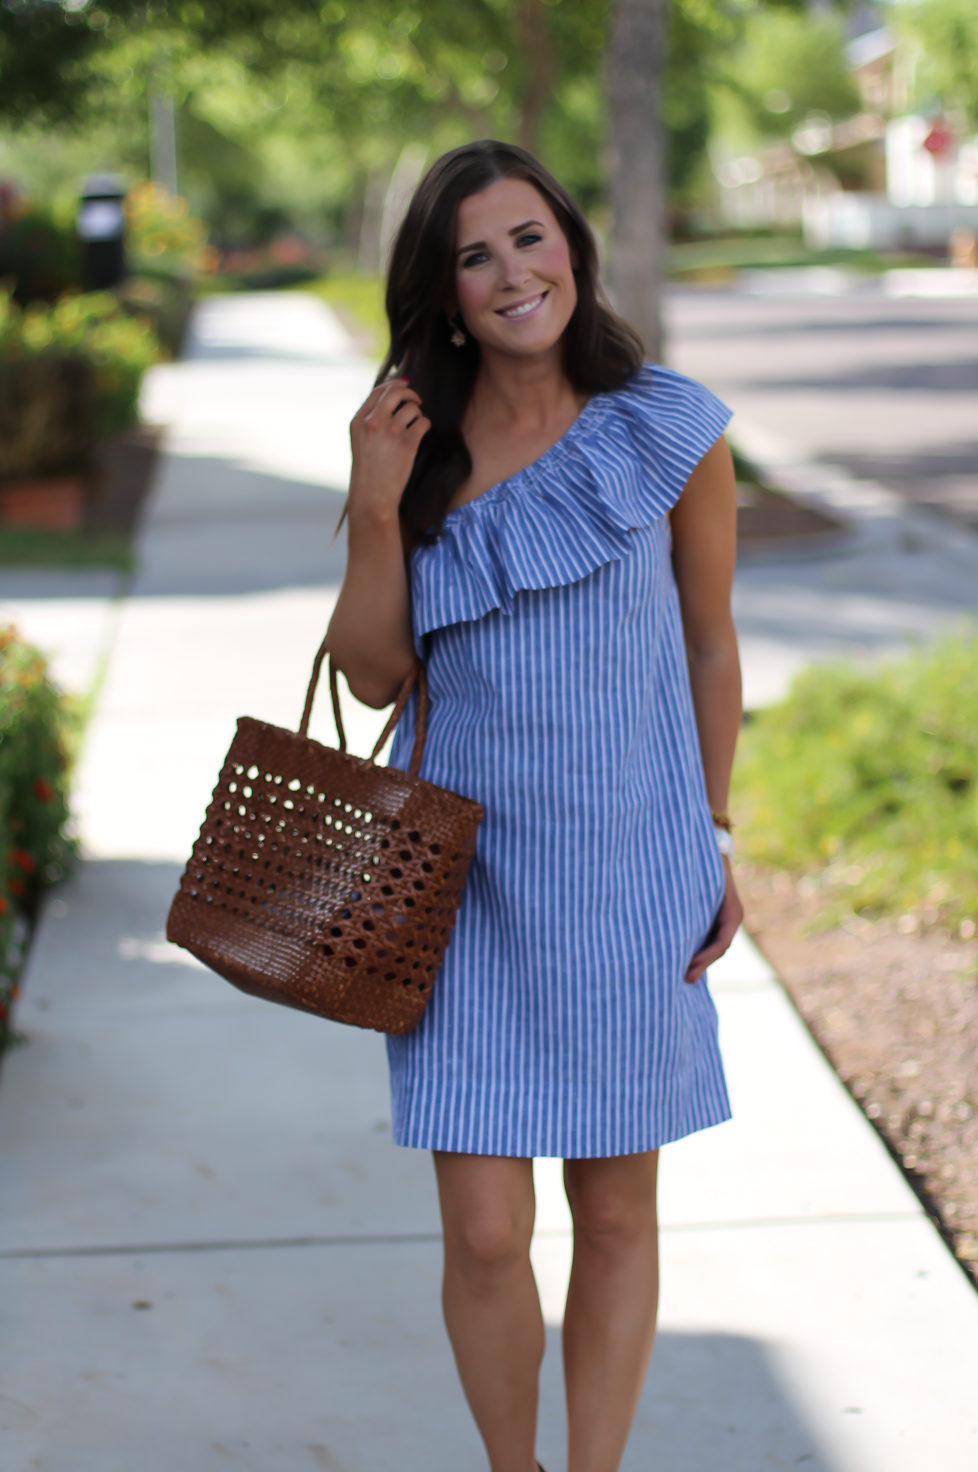 Striped One Shoulder Ruffle Dress, Cognac Leather Wedge Sandals, Leather Basket Tote, Madewell, J.Crew 4